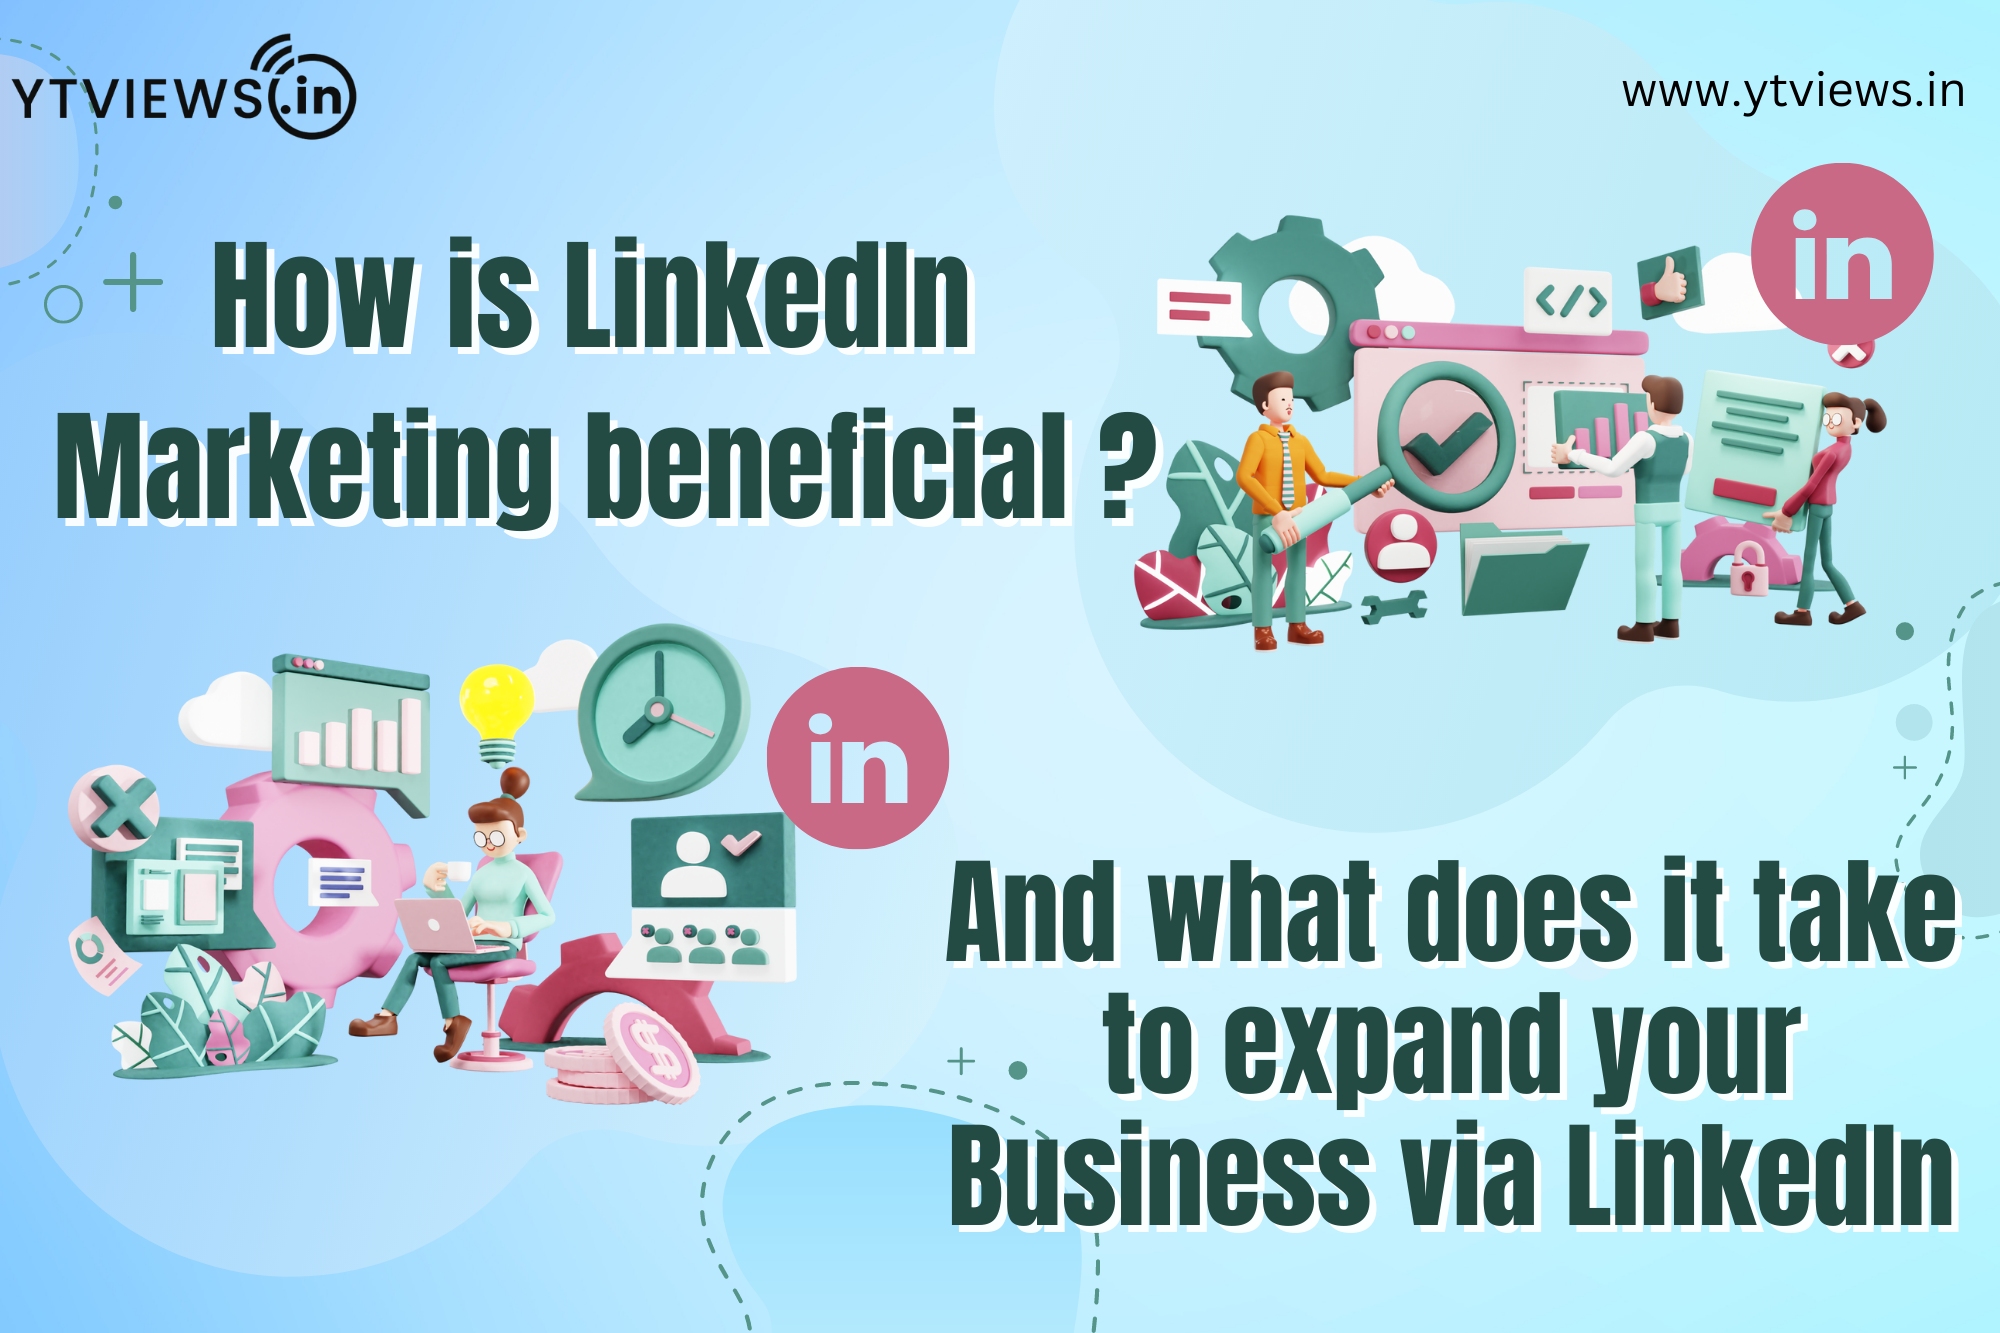 How is Linkedin Marketing beneficial and what does it take to expand your business via Linkedin?